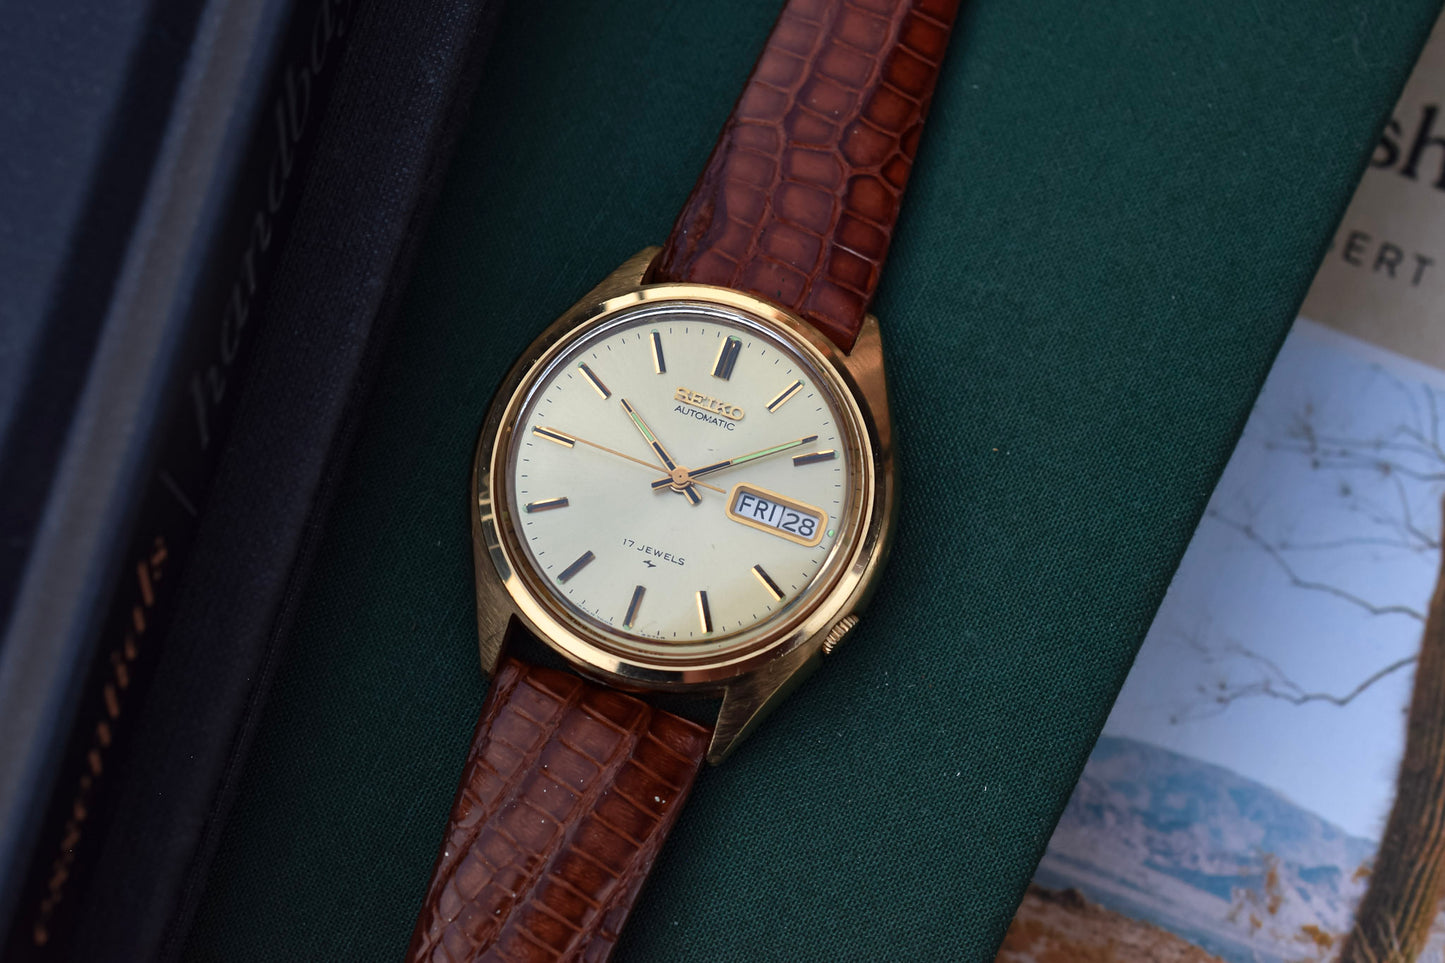 1980 Seiko Automatic Gold-Tone Day/Date Watch